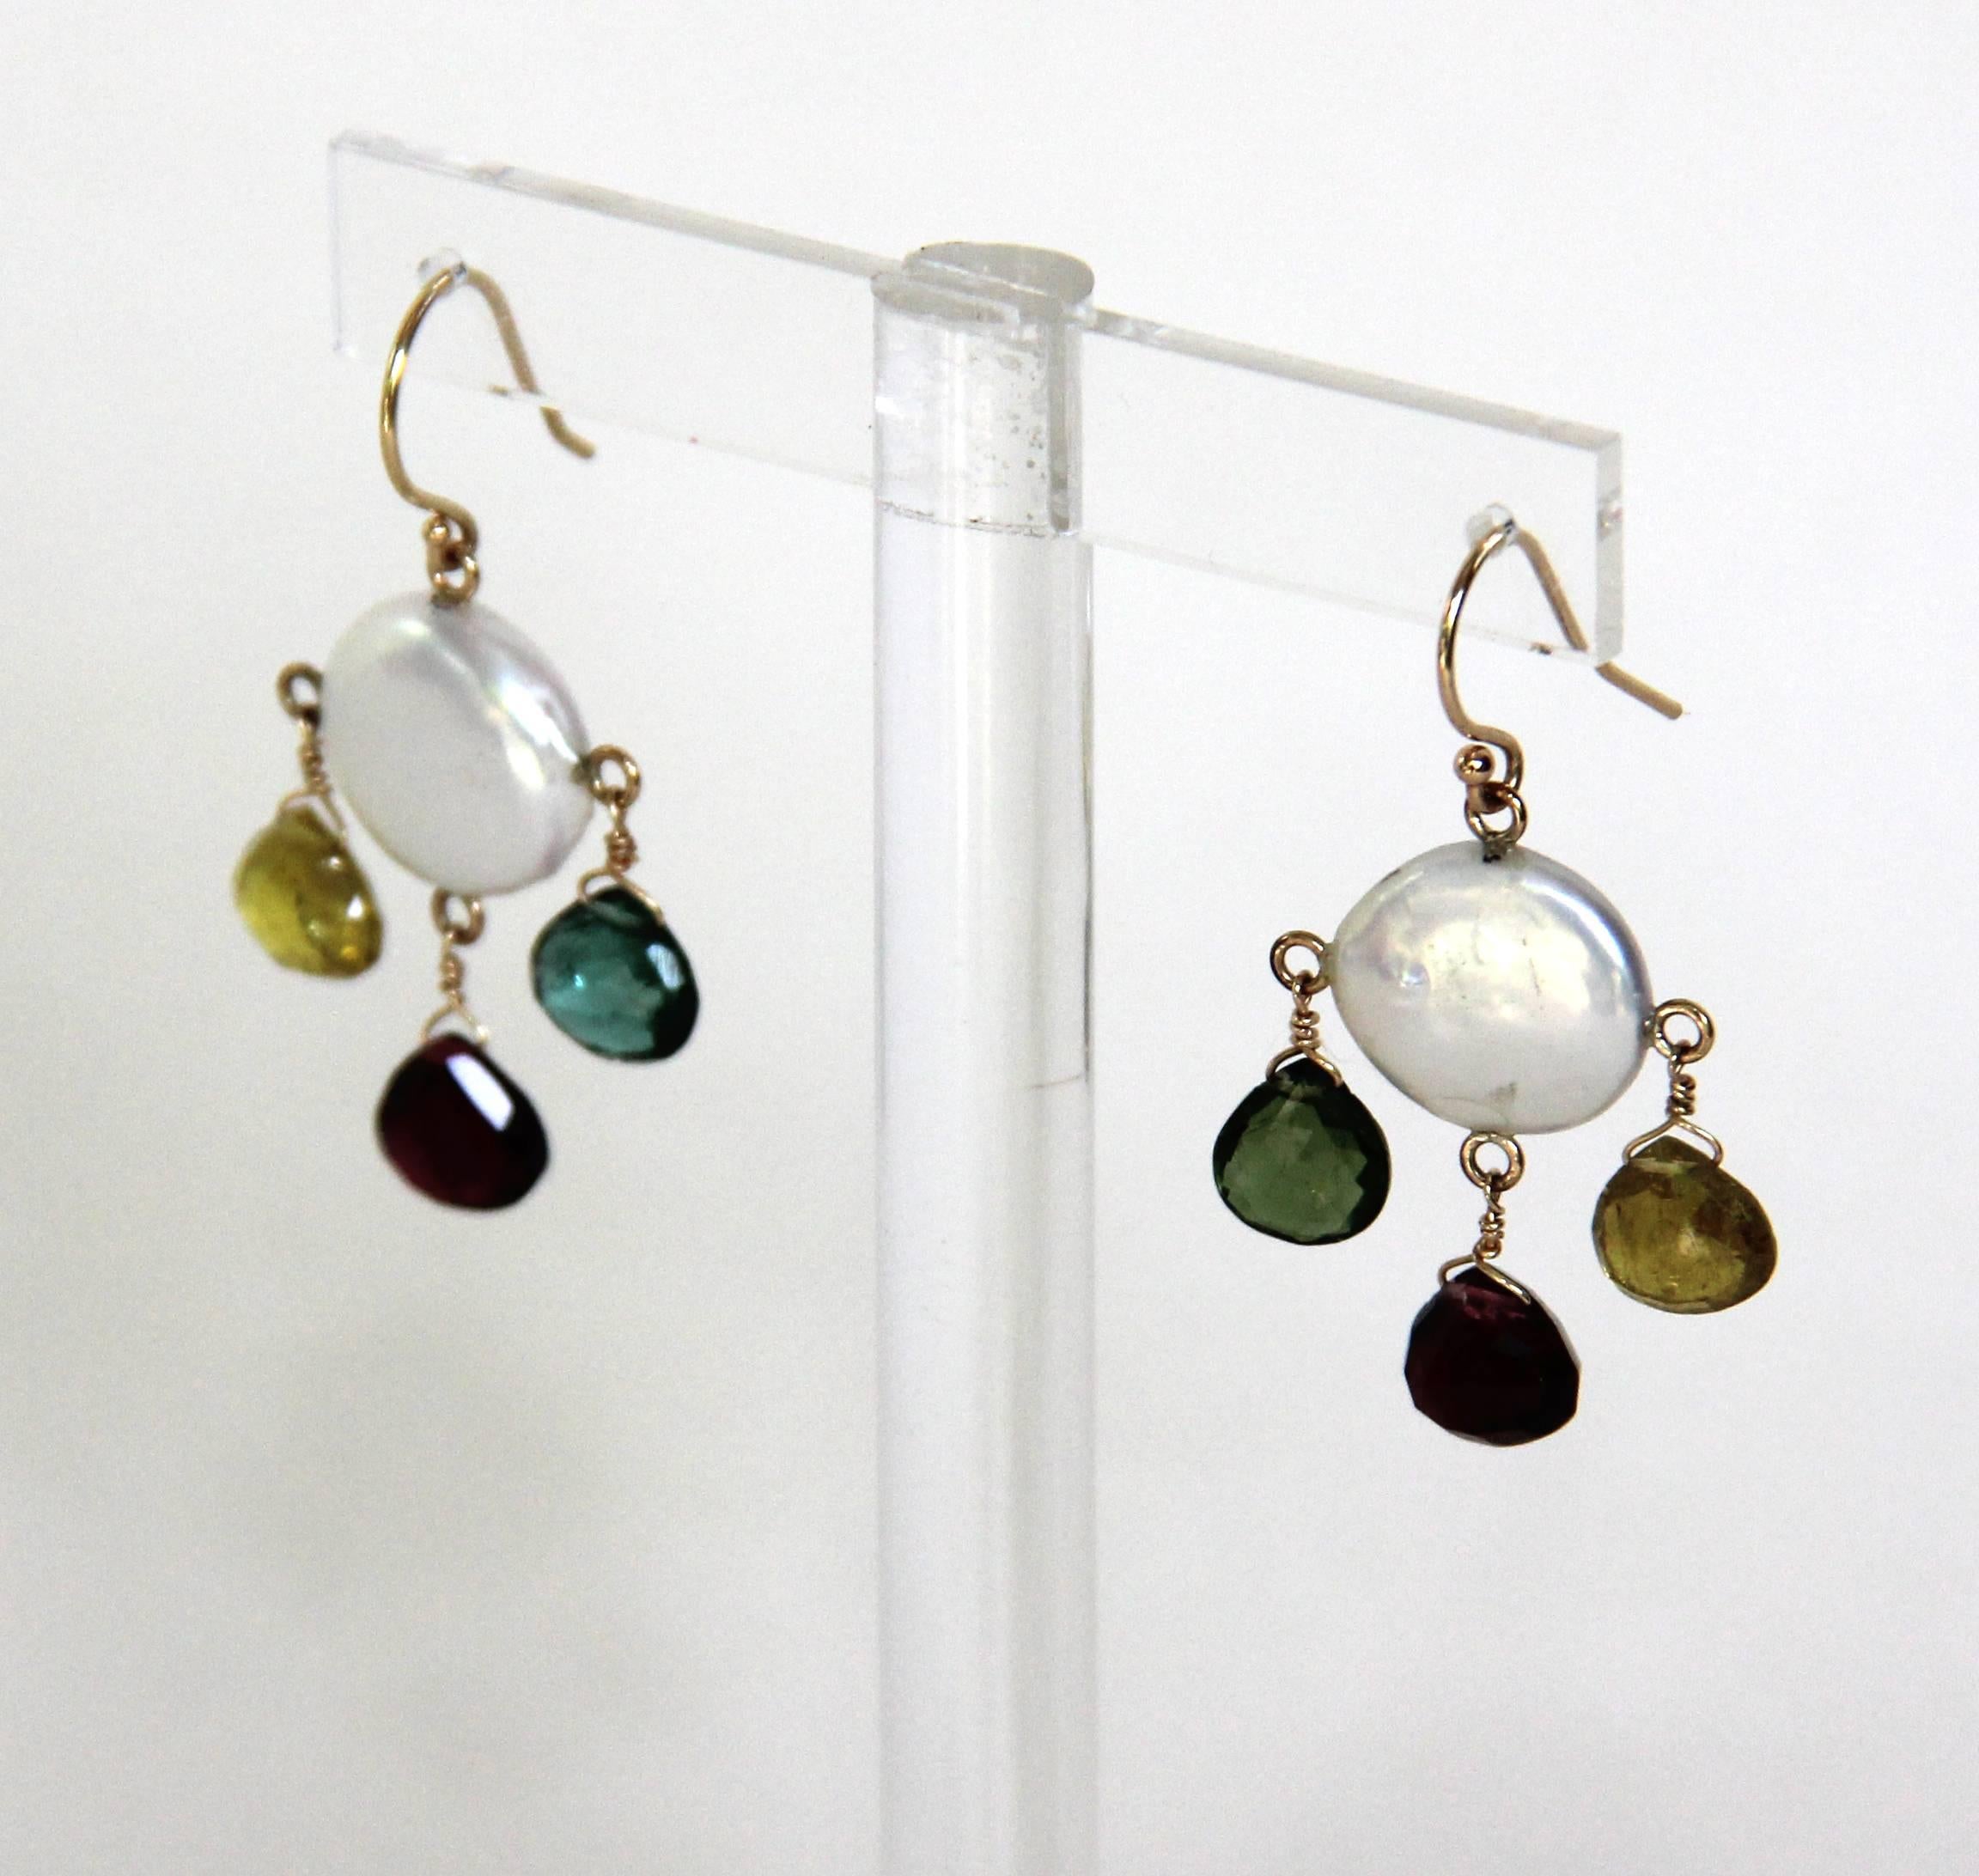 Beautiful pair of Chandelier Earrings by Marina J. This One of a Kind pair feature multi colored Tourmaline in a faceted Teardrop Briolette cut. The Tourmaline illuminate with radiant color when hit with light due to their translucent nature. The